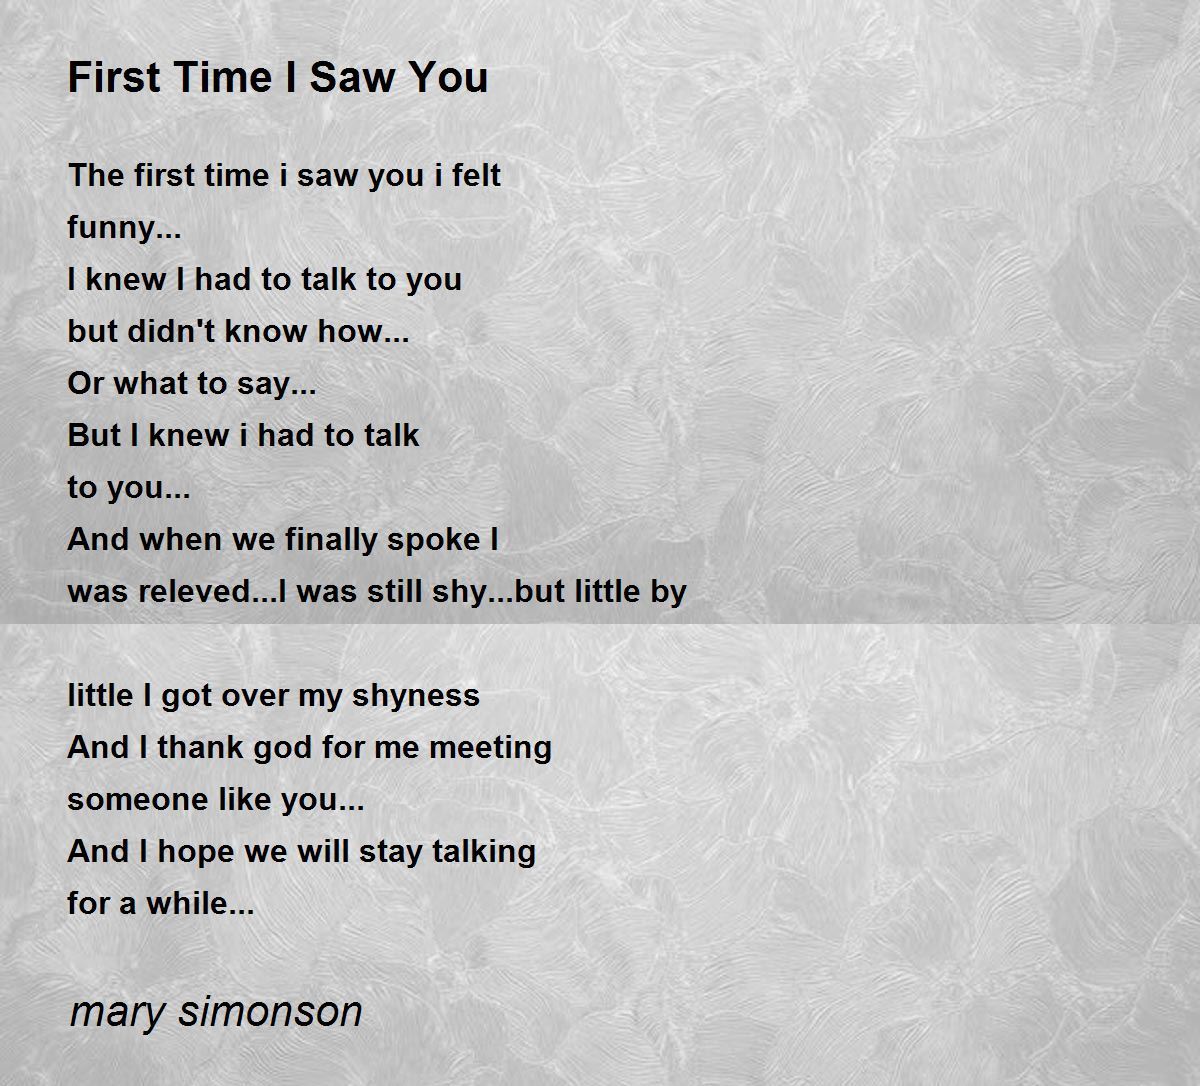 Meeting first for poems about time the someone Meeting You